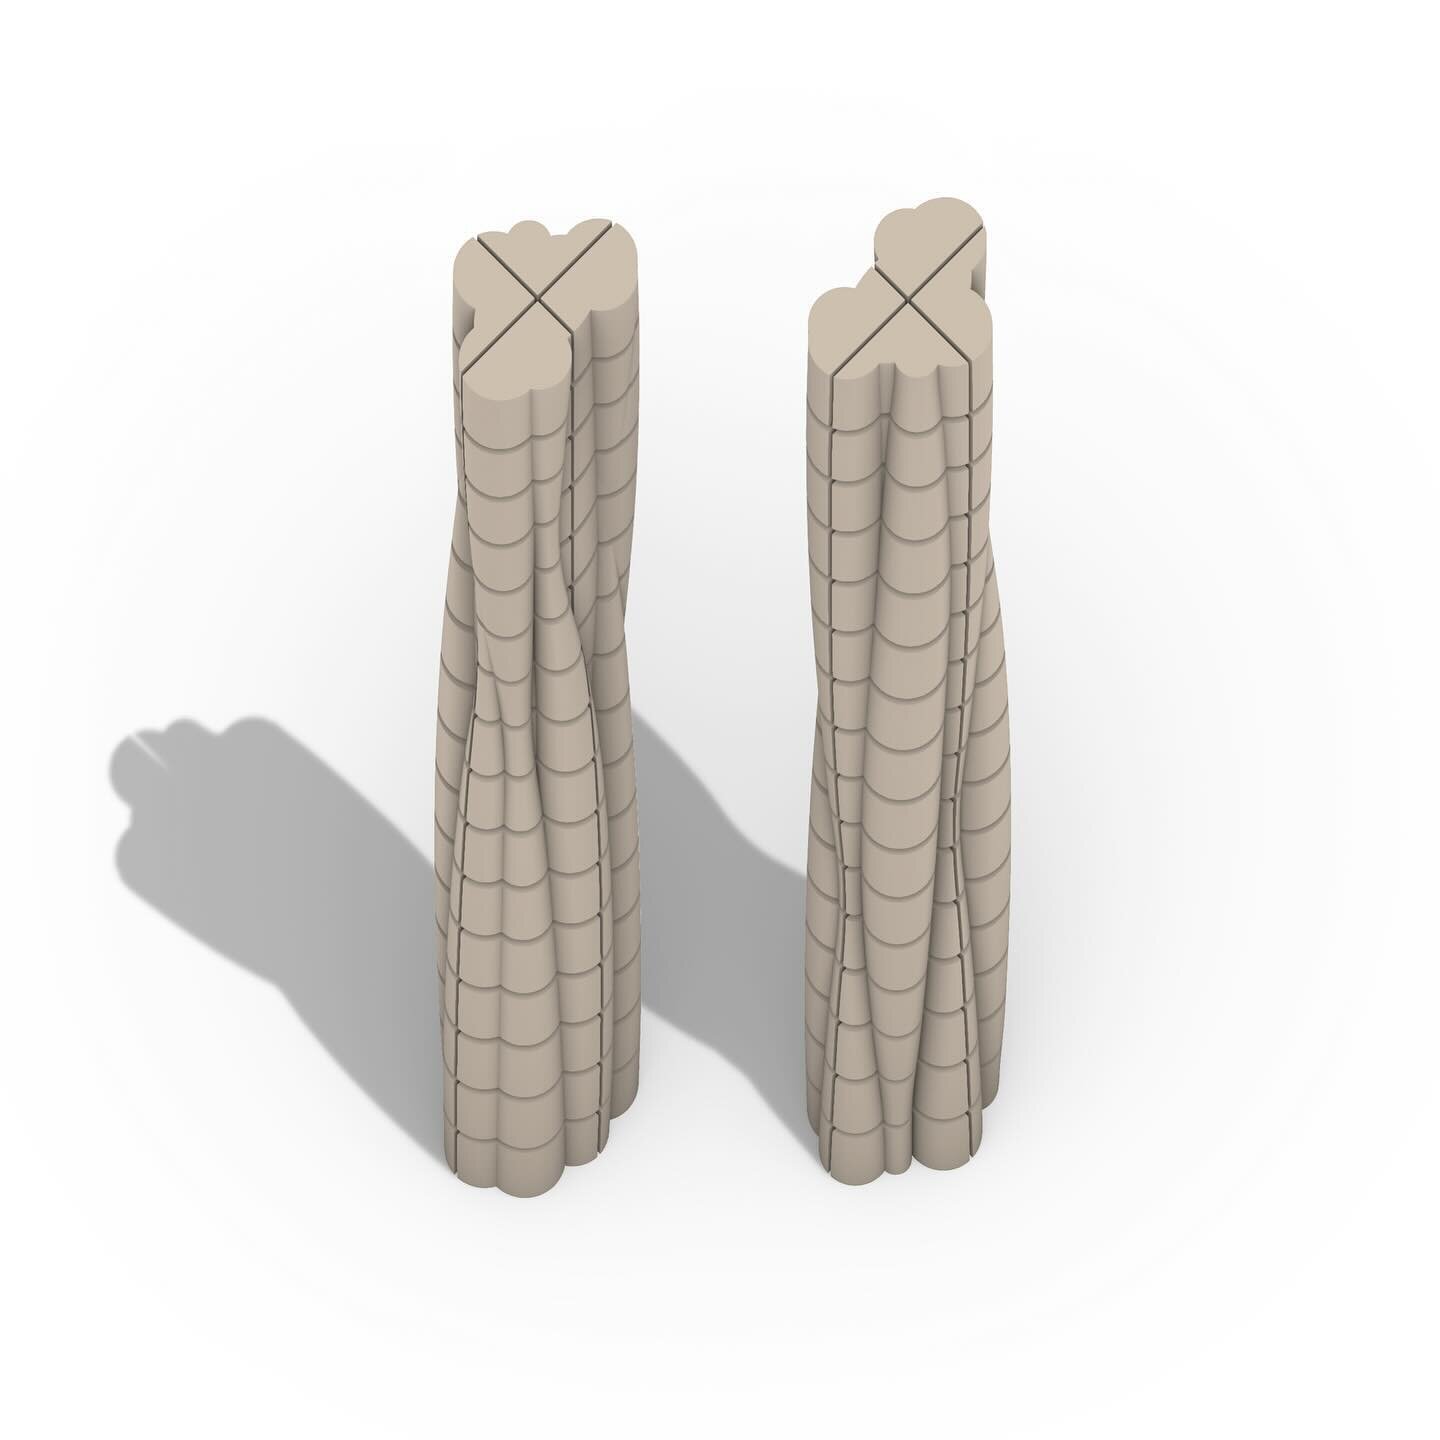 Column studies. #variableprojects #wip